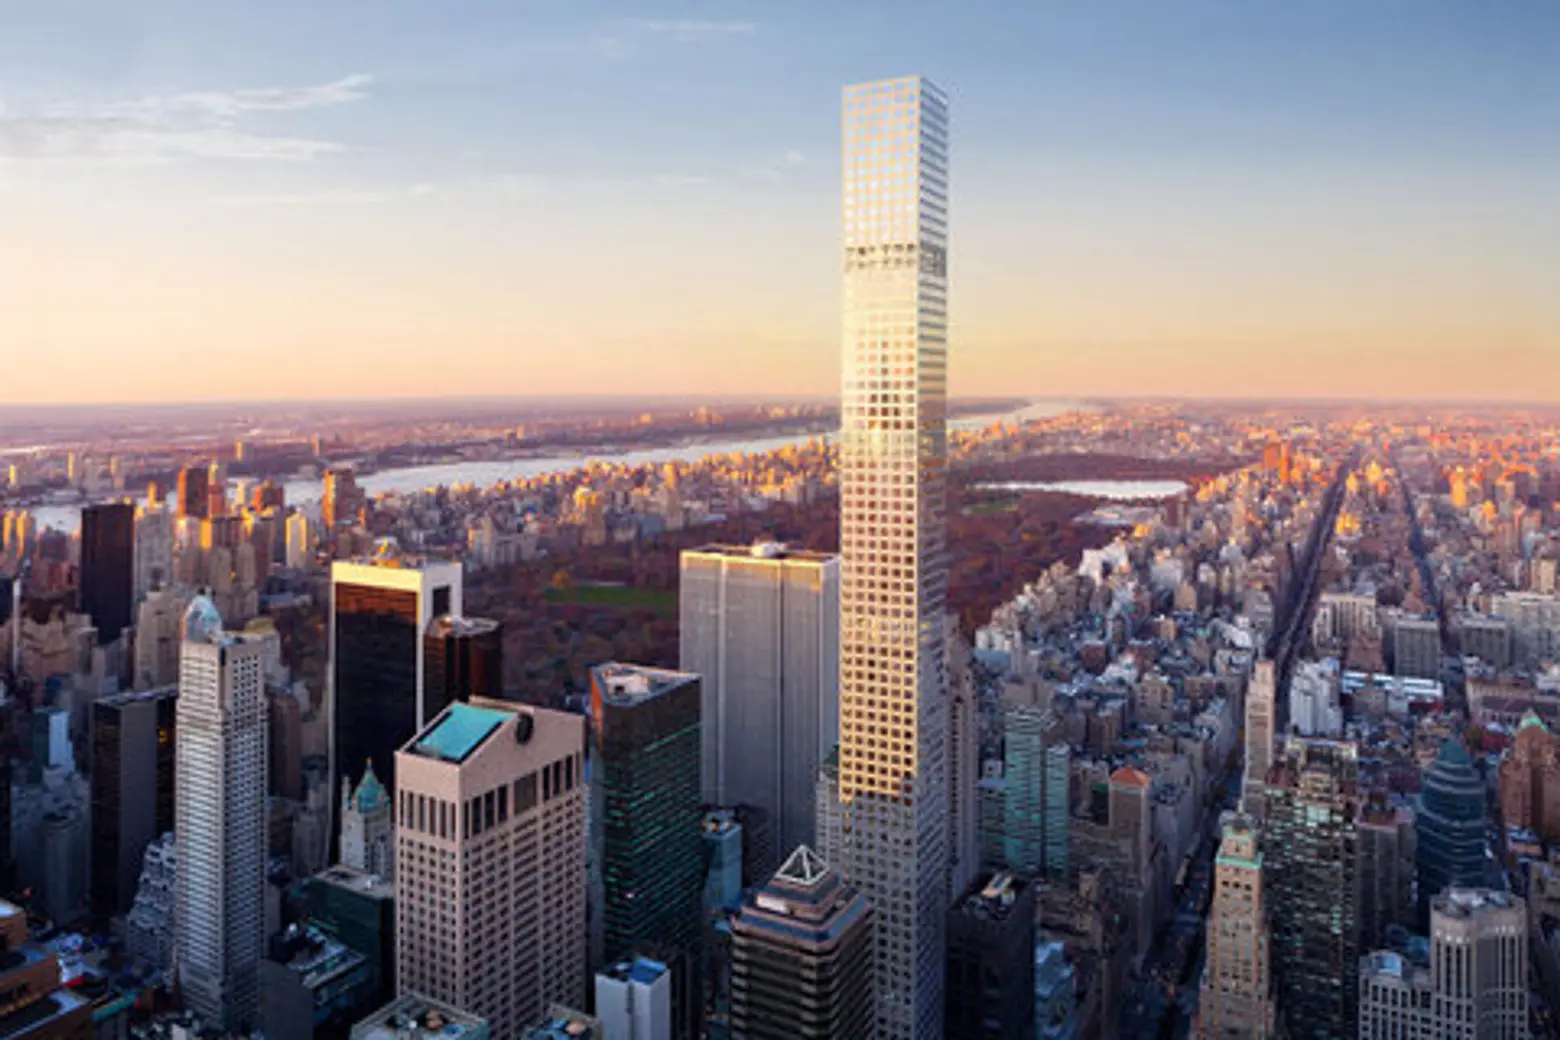 Construction Resumes at 432 Park; The Case Against Supertalls and Their Super-Long Shadows